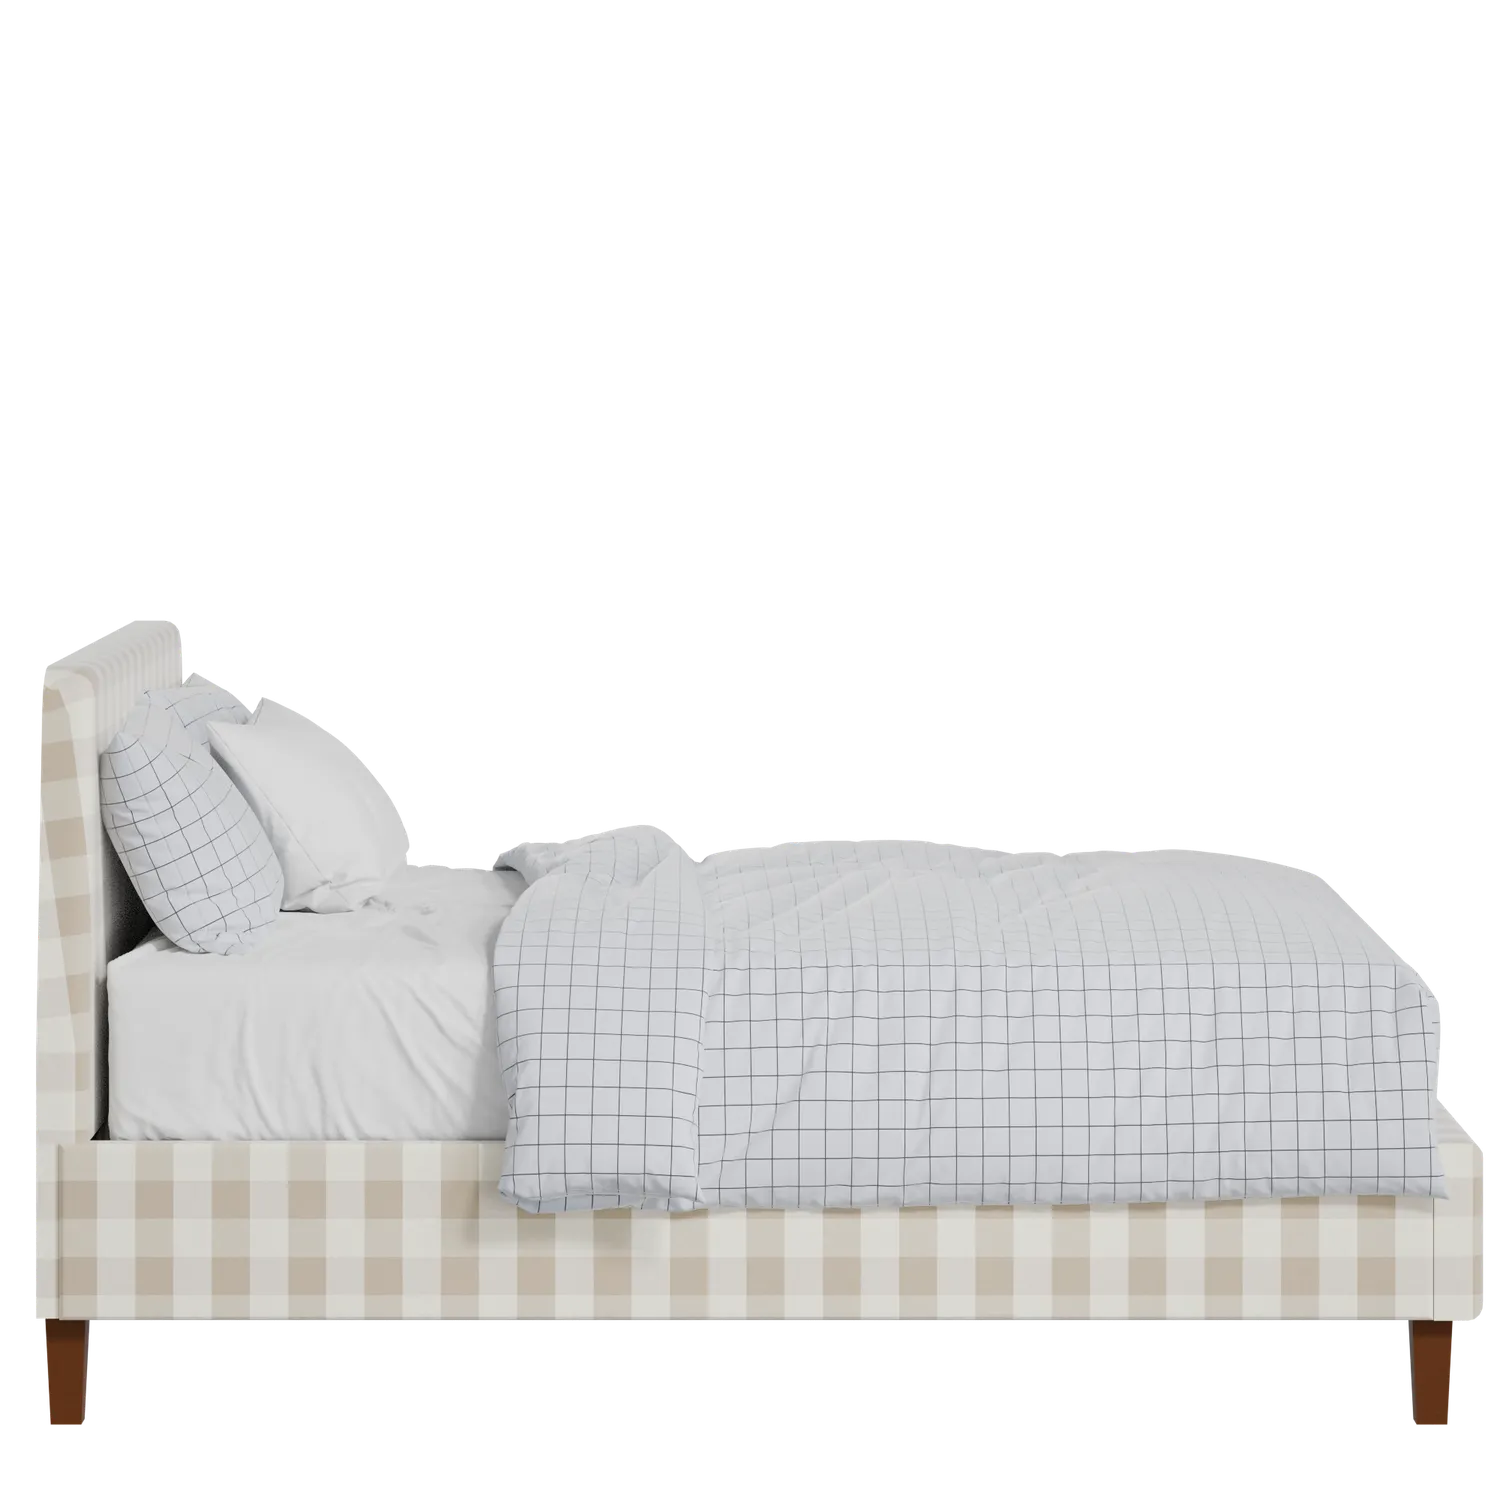 Hanwell Slim upholstered bed in Romo Kemble Putty fabric with Juno mattress